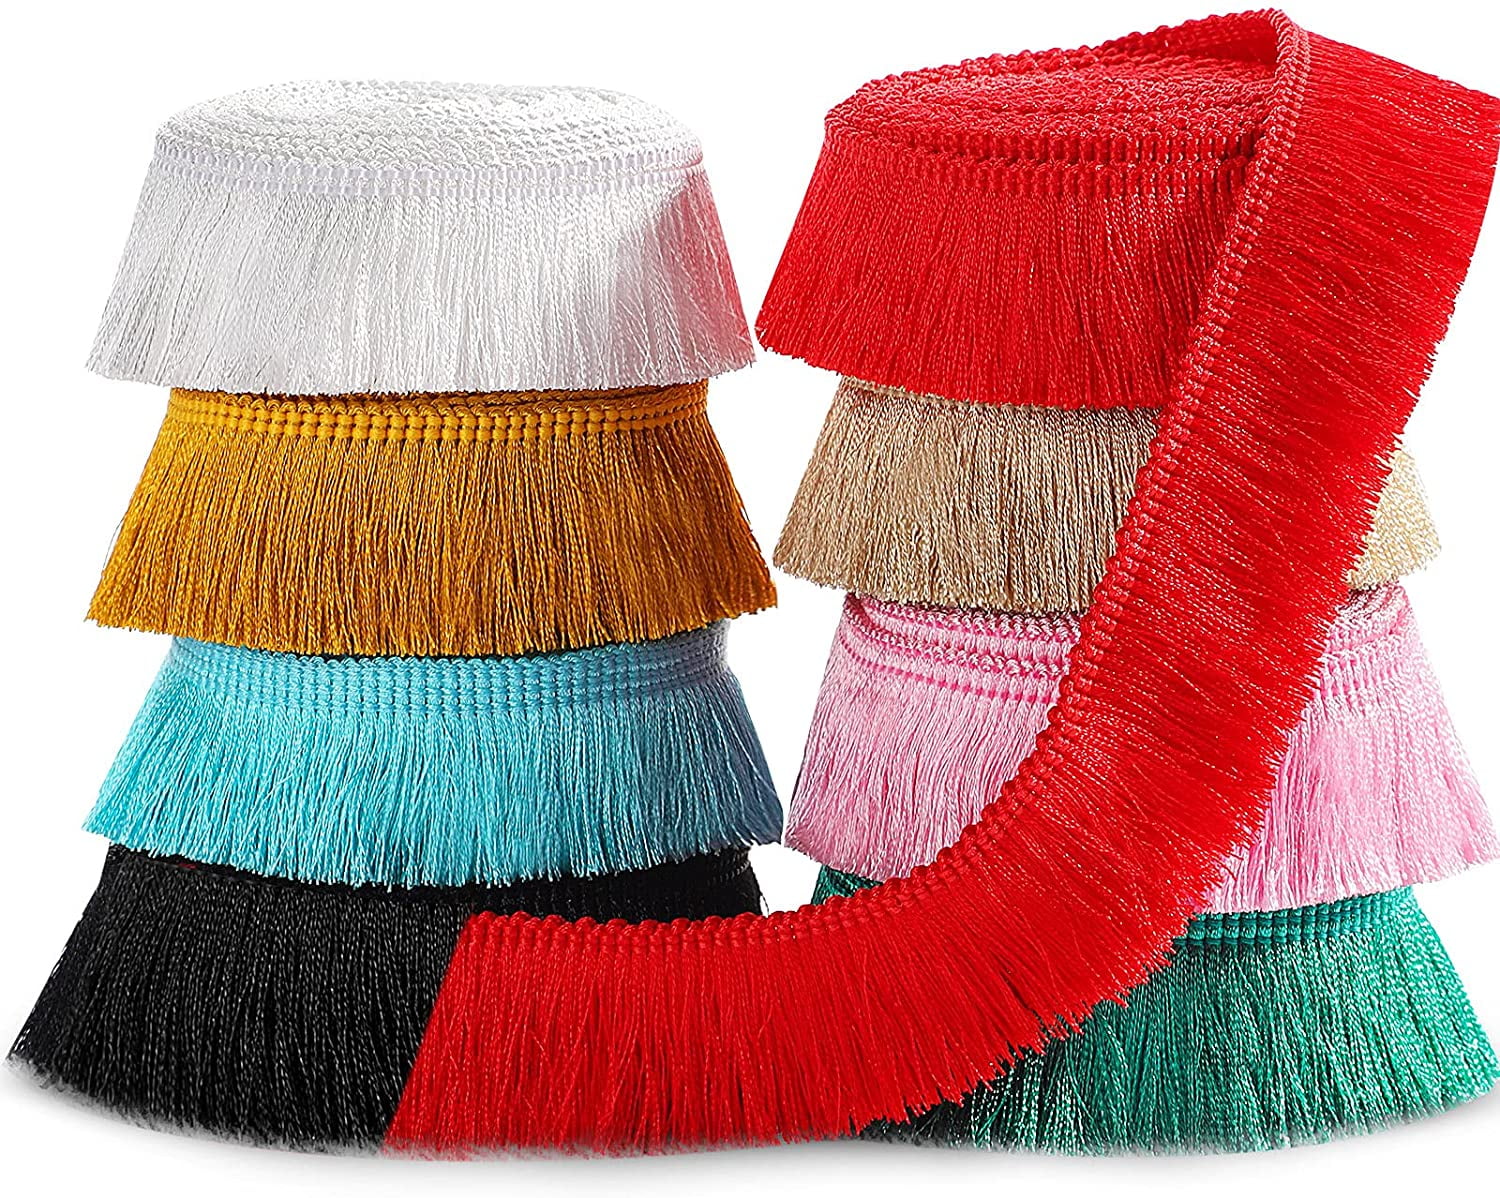 Kissitty 27 Yards Fringe Trim Tassel 1 Inch Polyester Fibre Lace Ribbon Trim for Sewing Clotheing Home Decors Black 